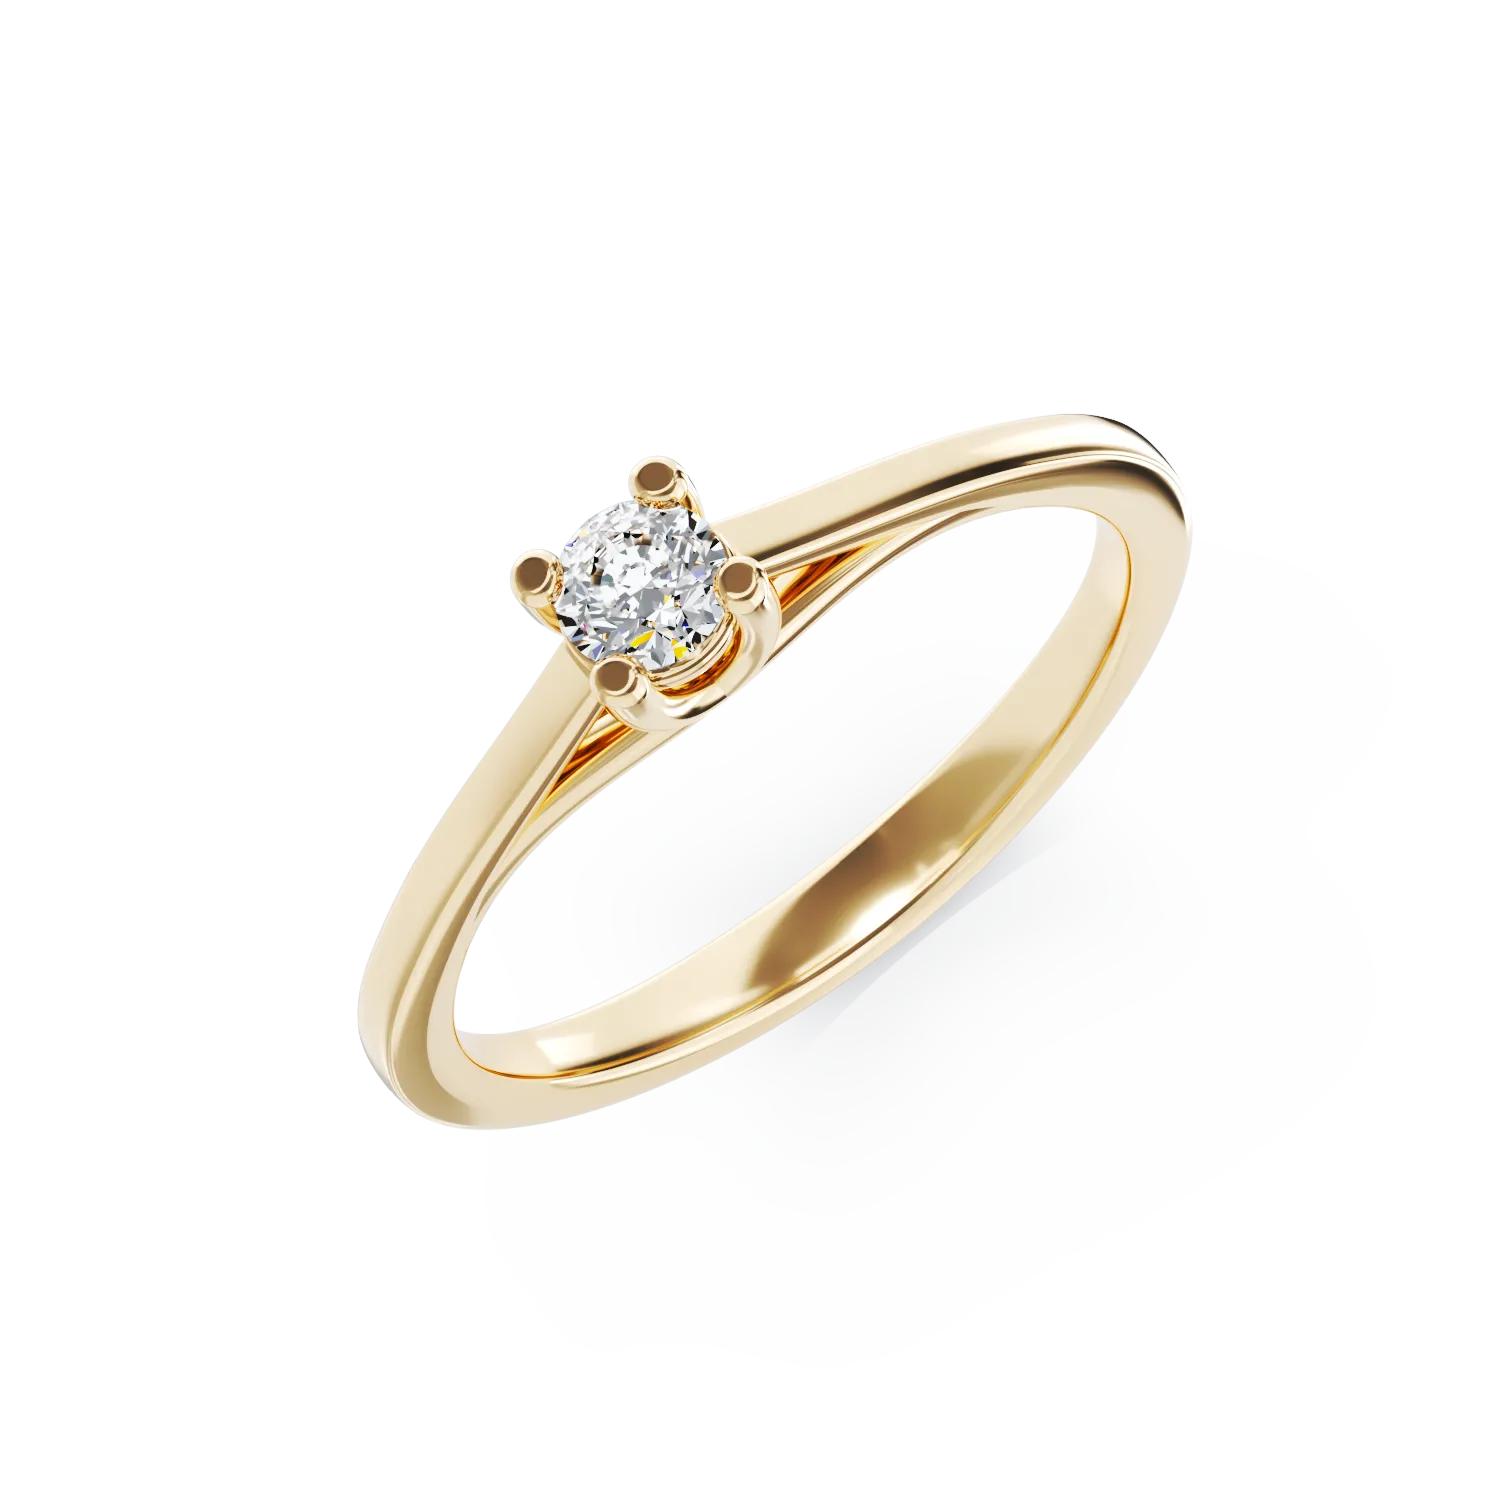 18K yellow gold engagement ring with a 0.16ct solitaire diamond